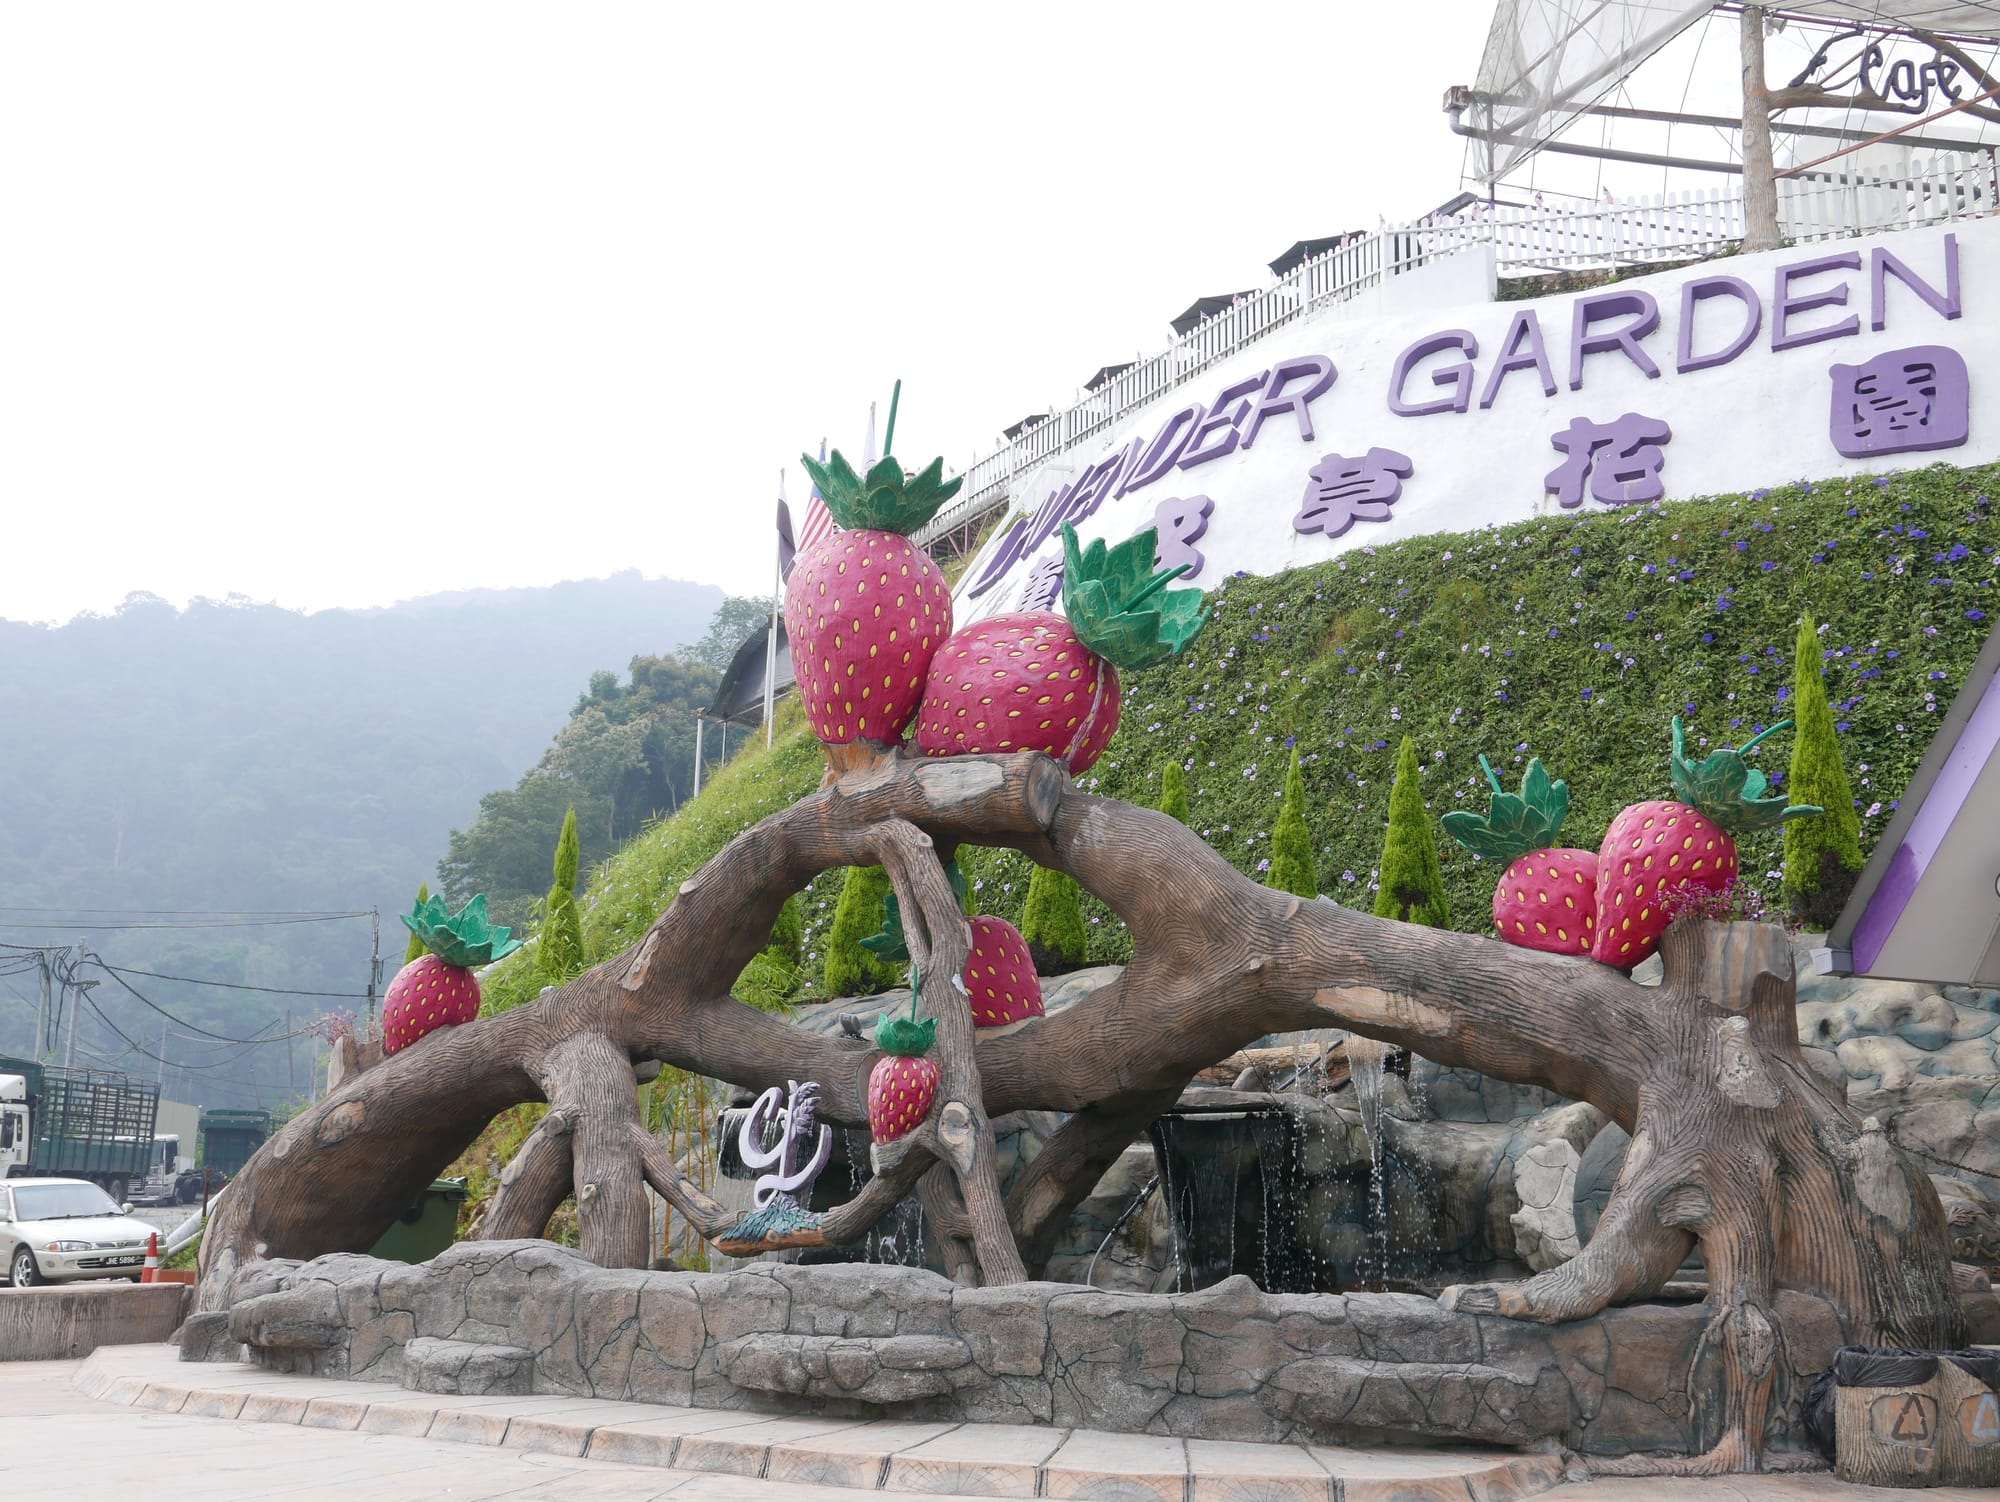 Photo by Author — Strawberries sculptures in the Cameron Highlands, Malaysia